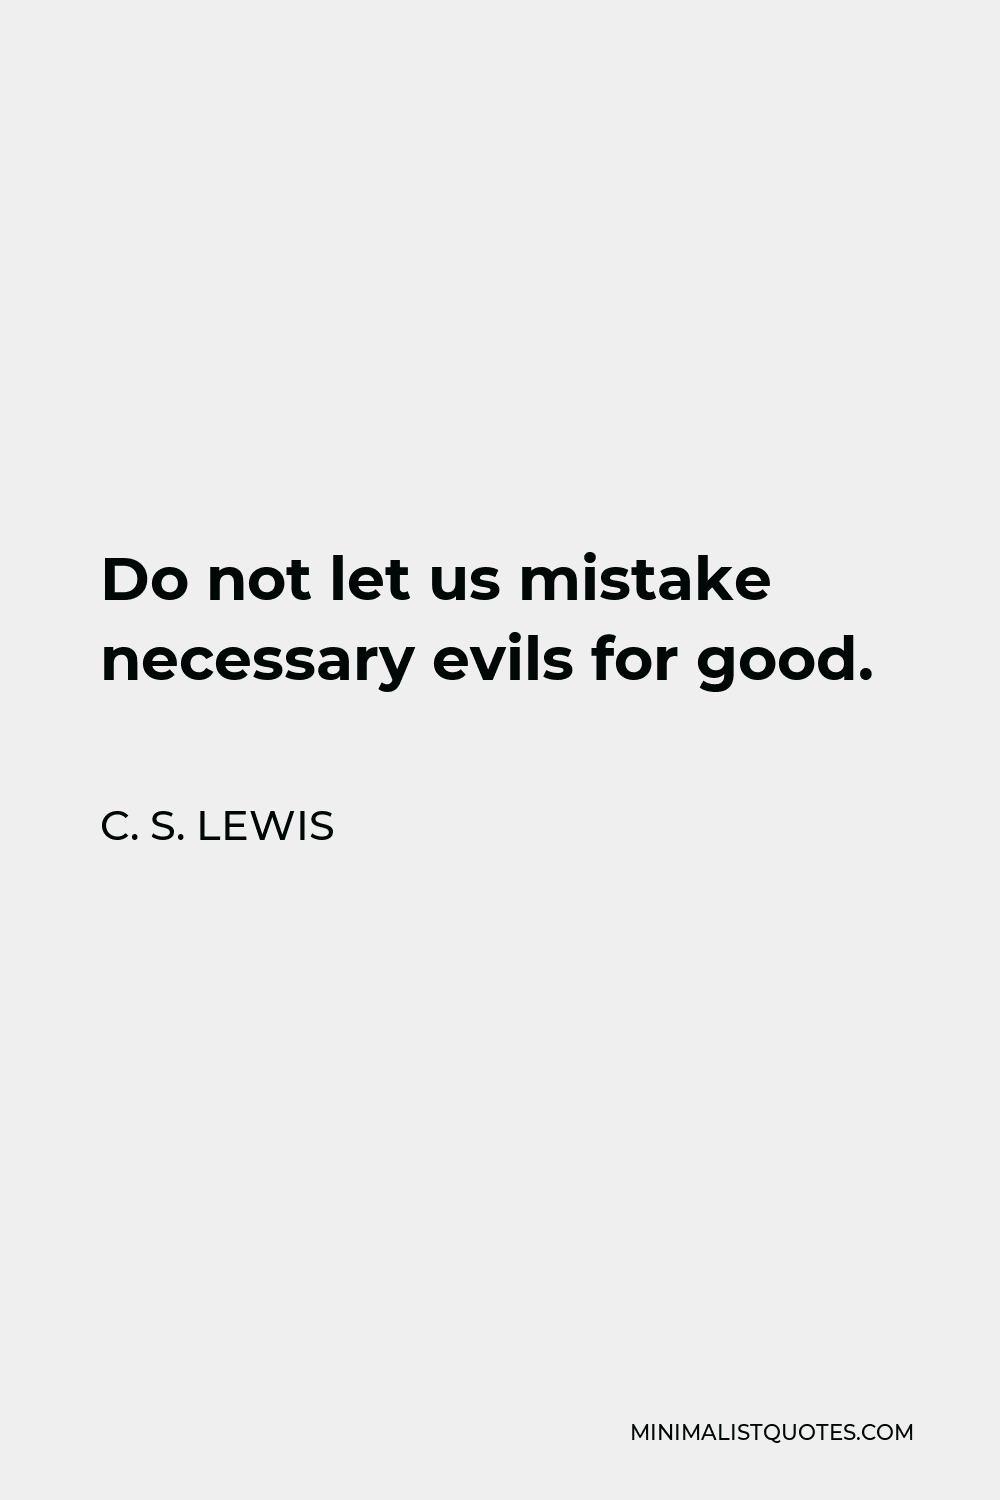 C. S. Lewis Quote: Do not let us mistake necessary evils for good.